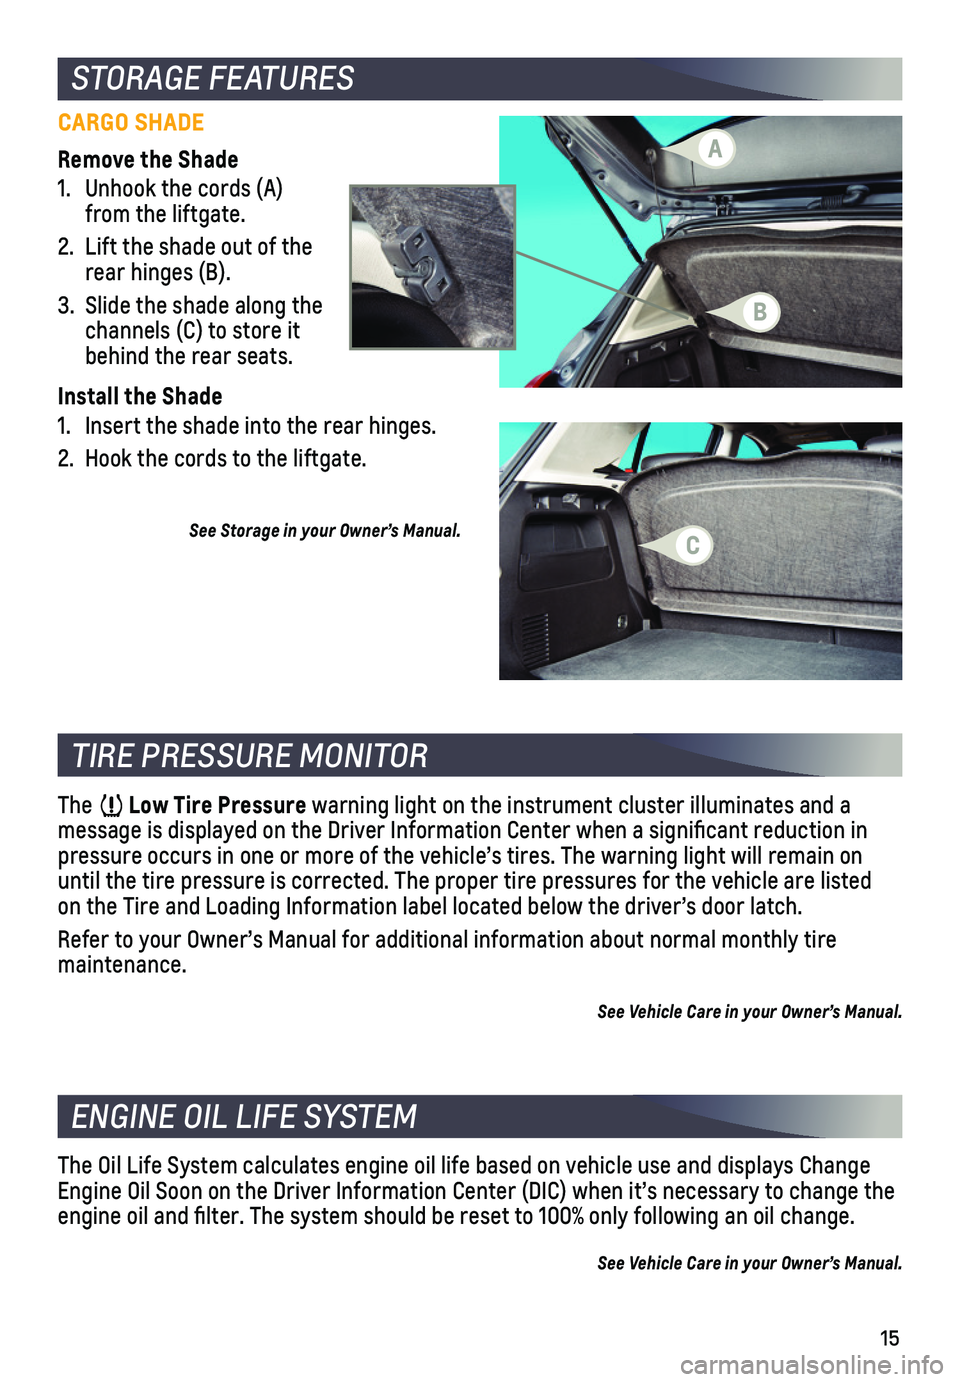 CHEVROLET TRAX 2018  Get To Know Guide 15
STORAGE FEATURES 
CARGO SHADE
Remove the Shade
1. Unhook the cords (A) from the liftgate.
2. Lift the shade out of the rear hinges (B).
3. Slide the shade along the channels (C) to store it behind 